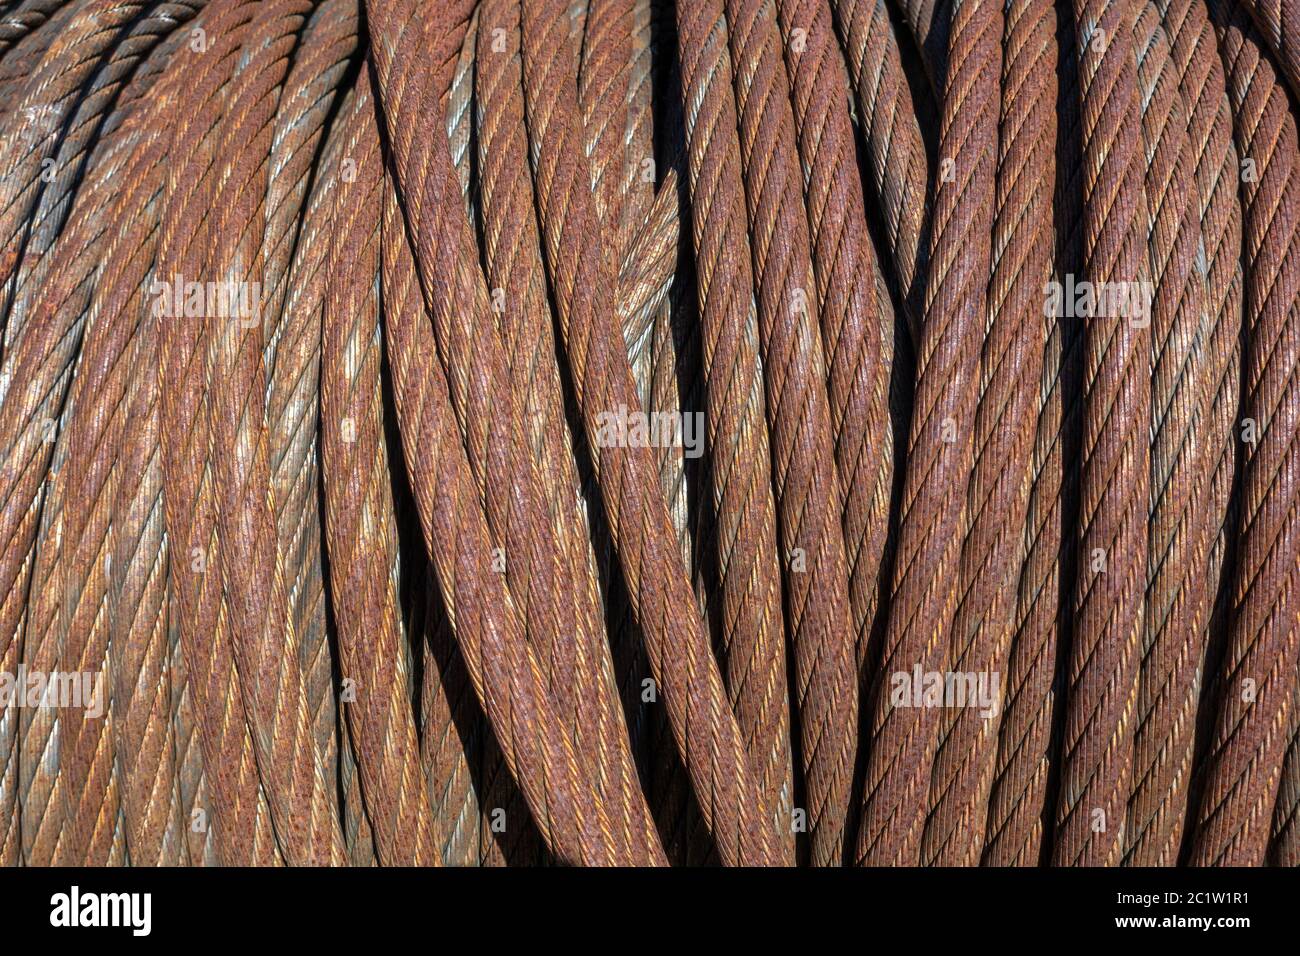 Rusty, thick, coiled wire rope in closeup in the sunshine Stock Photo